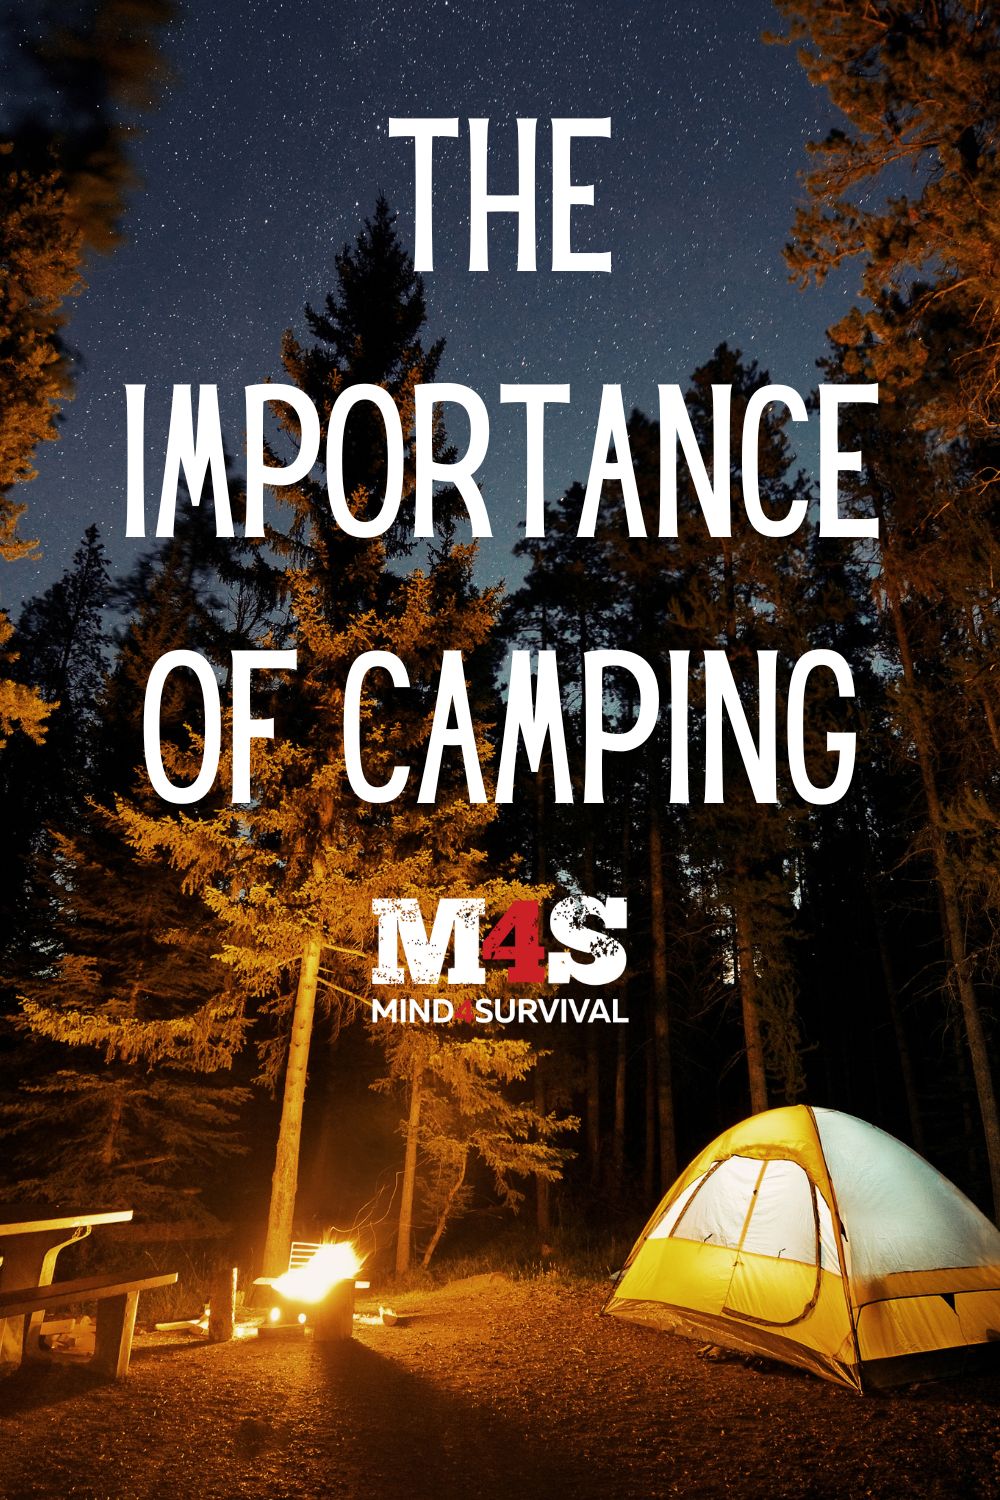 The Importance of Camping